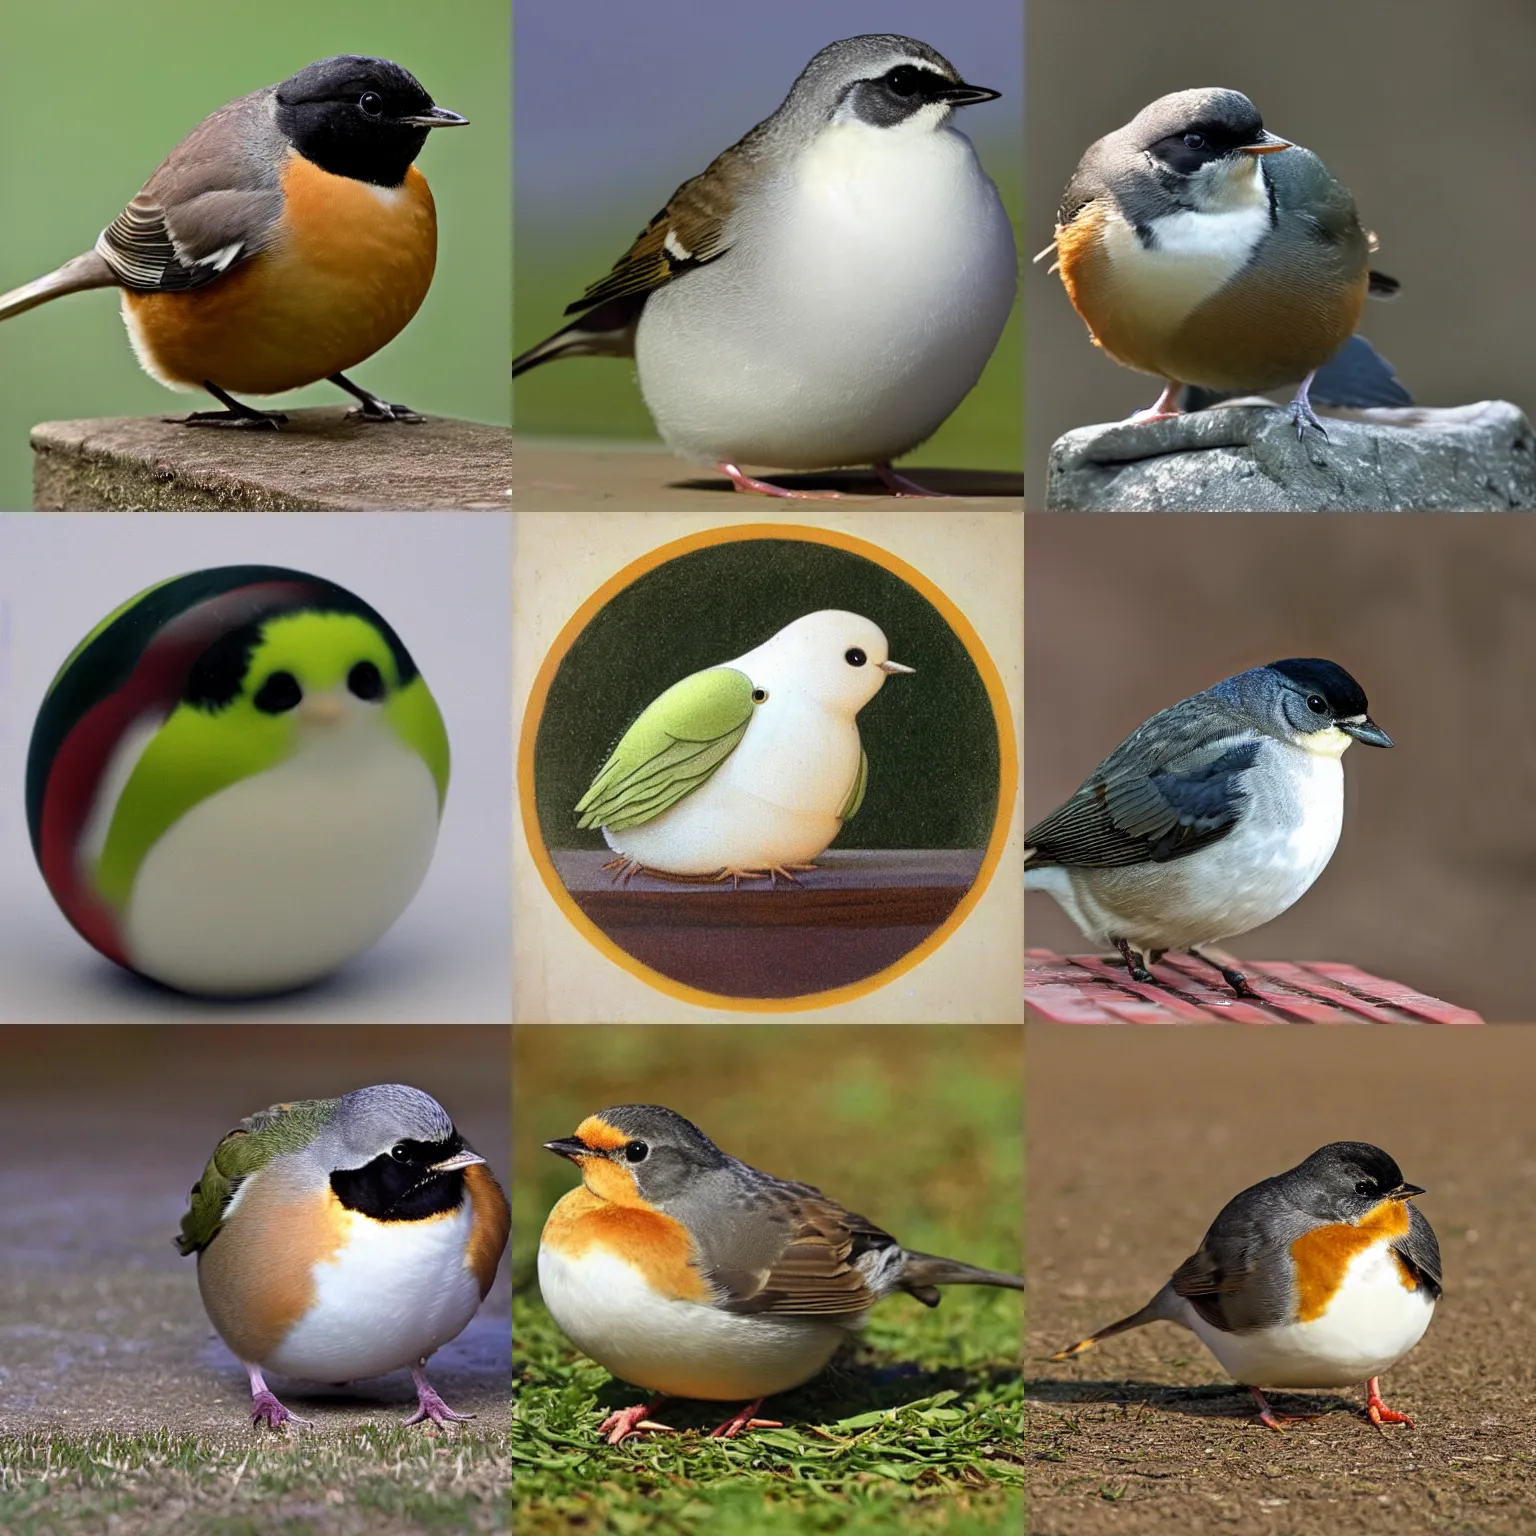 Prompt: A very fat very chubby very obese round robin bird, ball-shaped